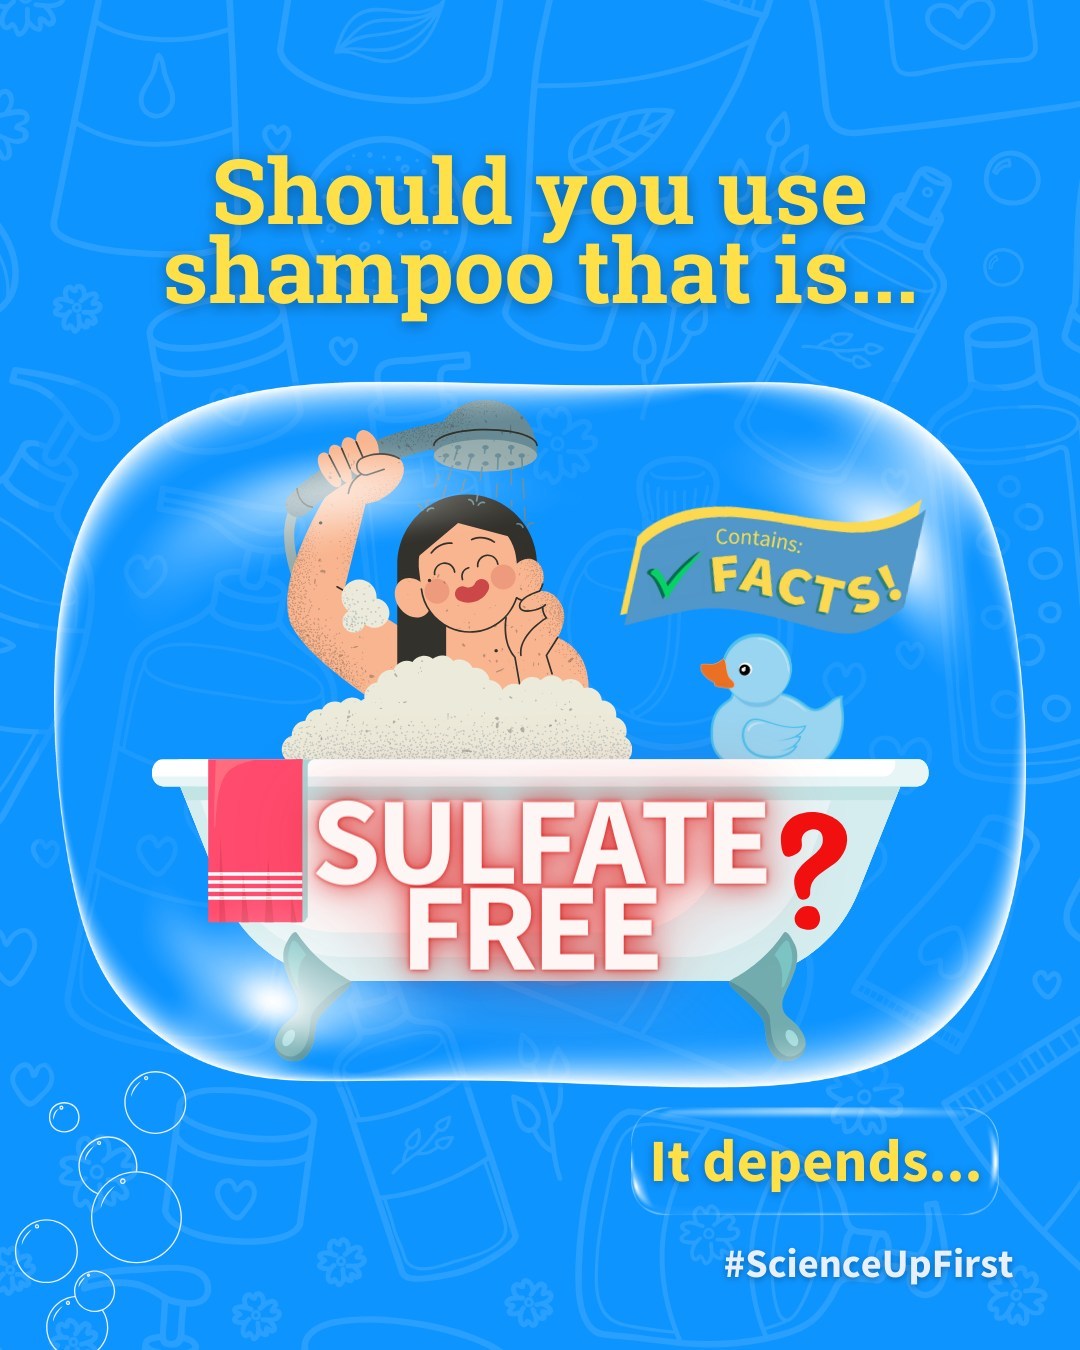 Should you use shampoo that is sulfate free?